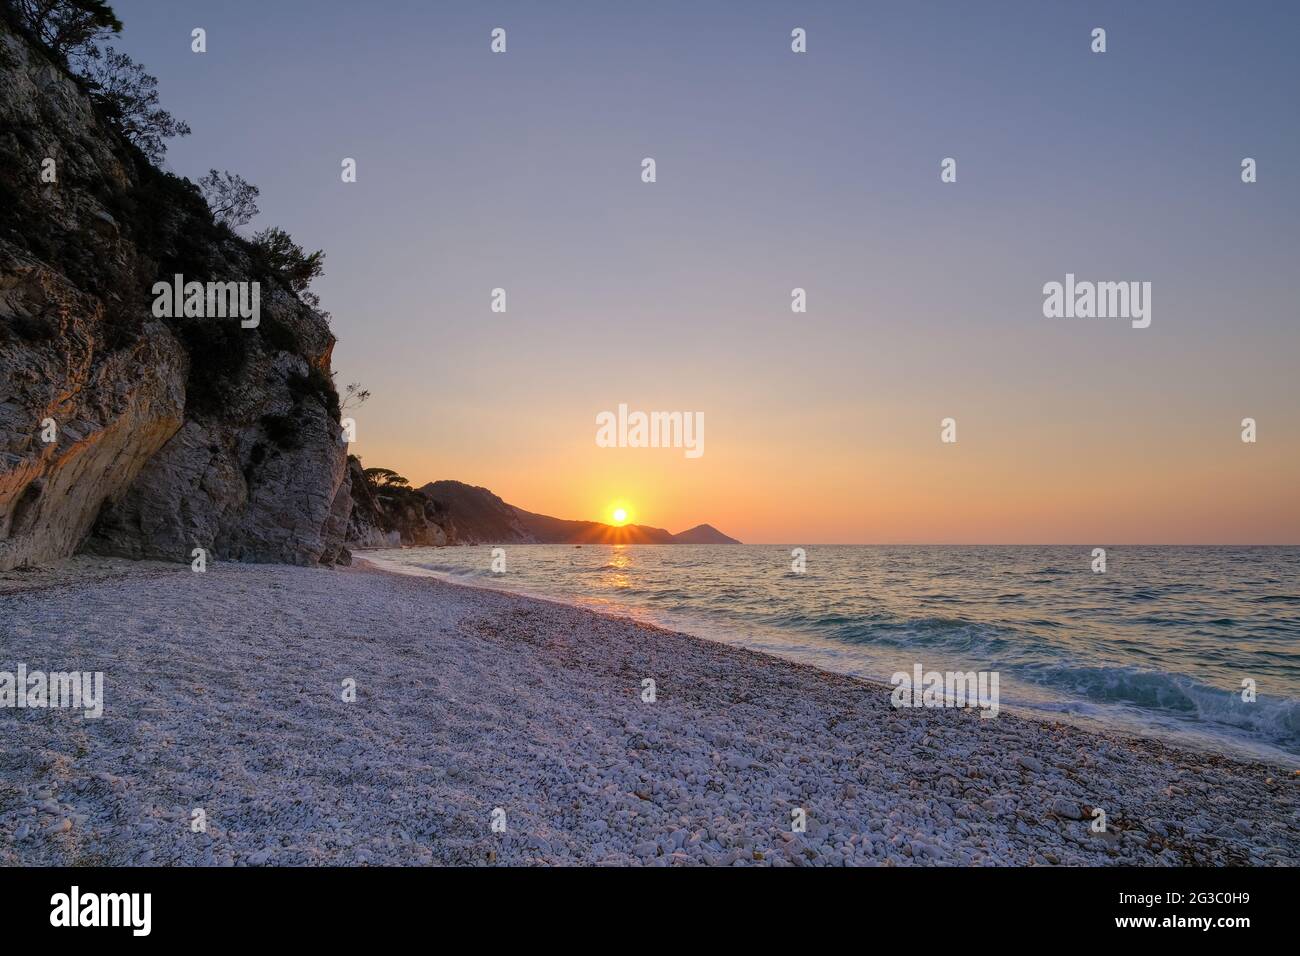 sunset on a beach in italy Stock Photo